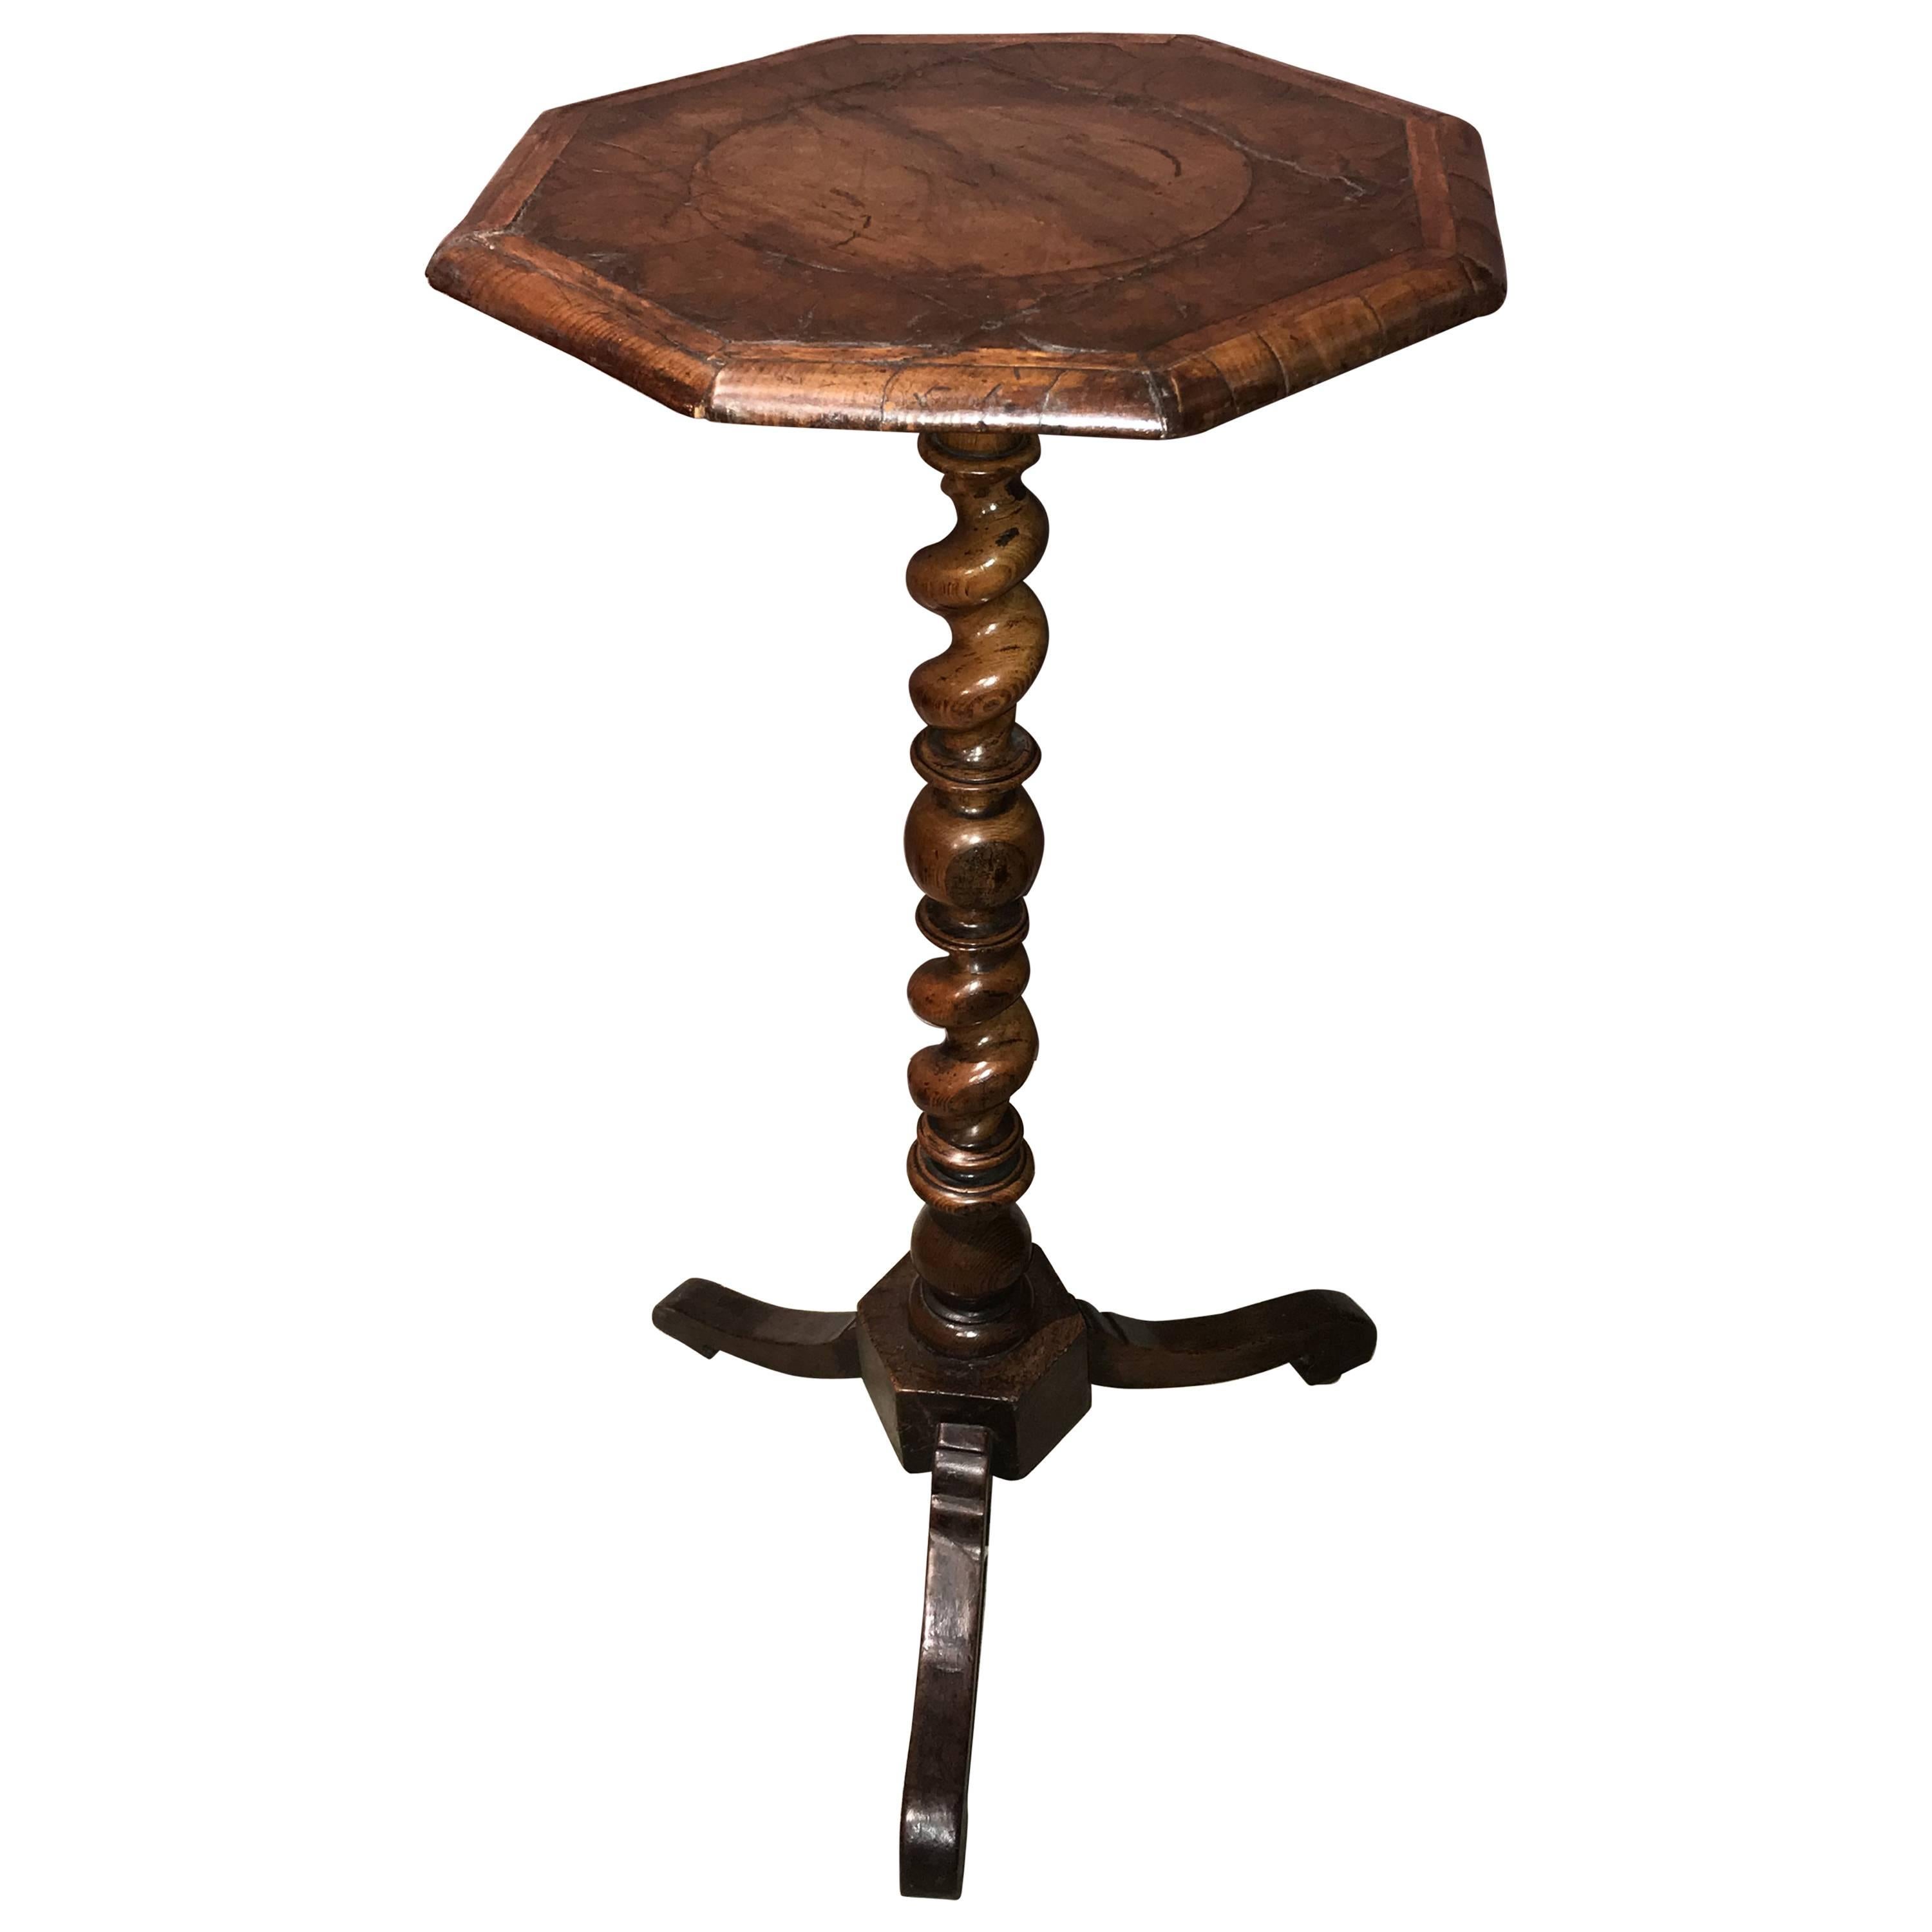 English Walnut Octagonal Top Candle Stand with Marquetry, circa 1680-1710